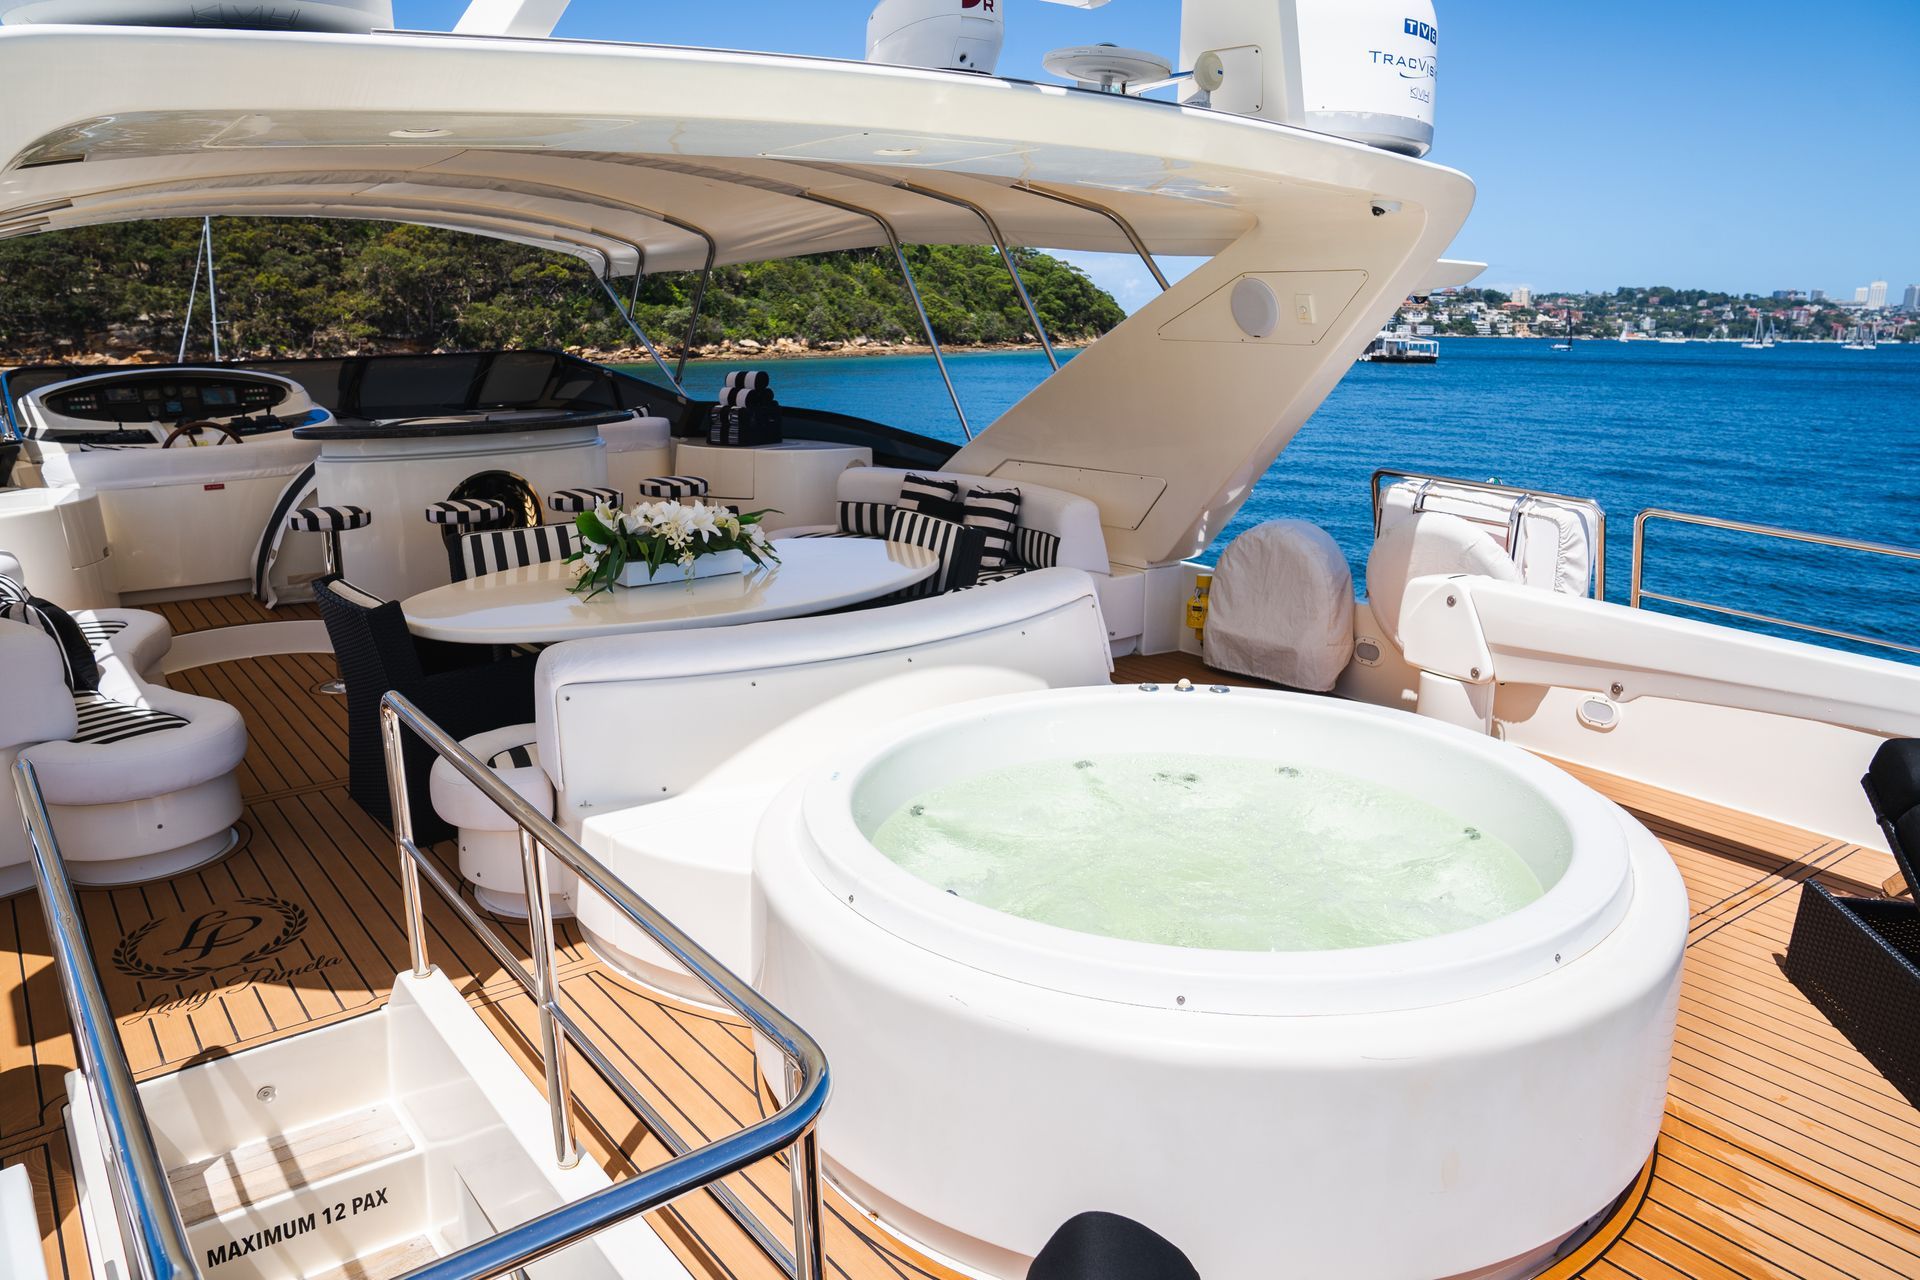 There Is a Hot Tub on The Deck of A Yacht — Club Nautical in Gold Coast, QLD